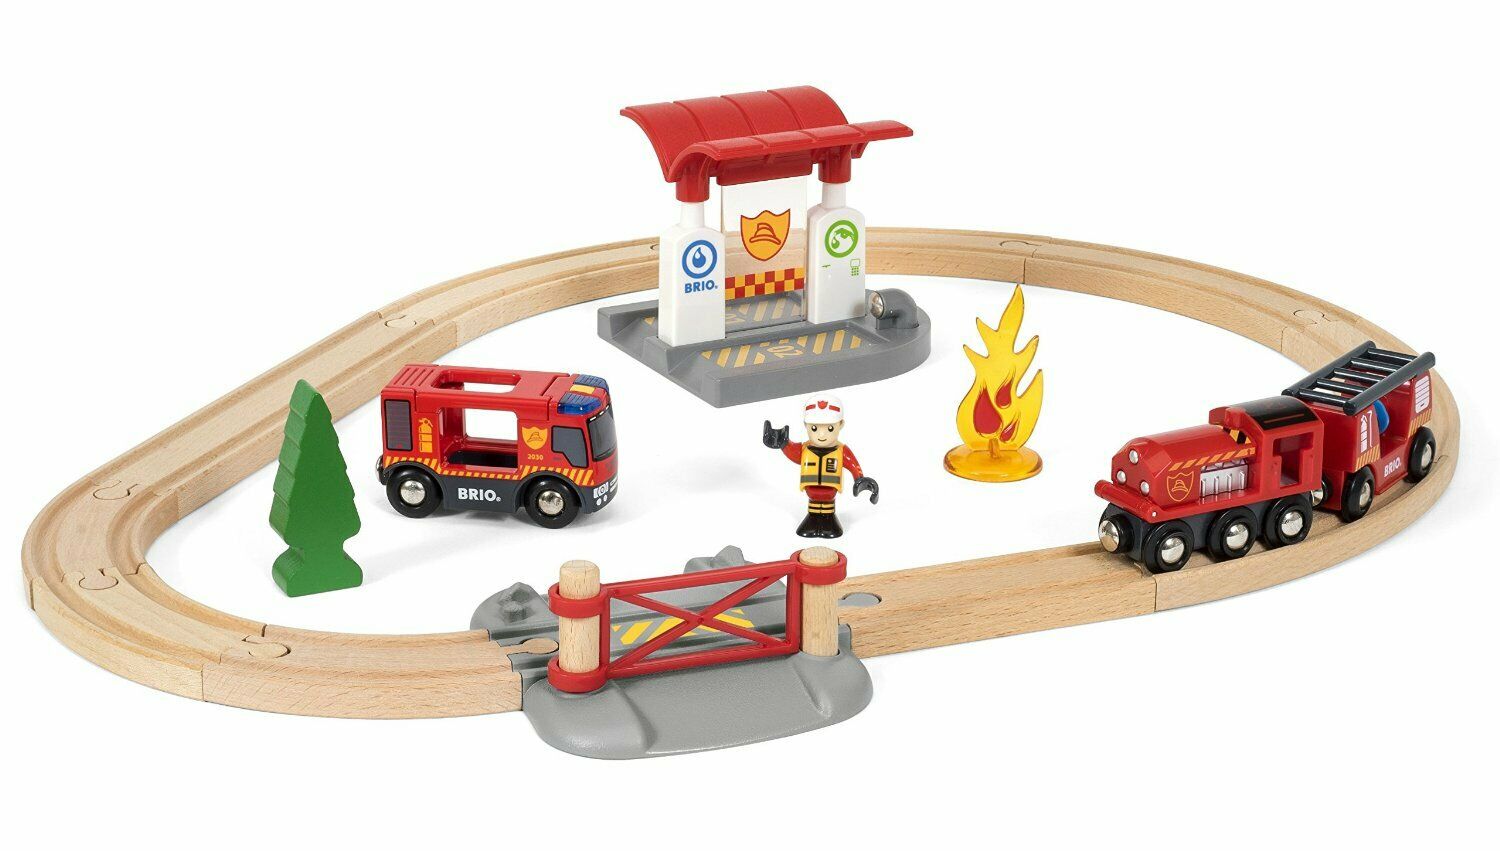 33815 BRIO Rescue Fire Fighter Set (Wooden Railway) Age 3 Years+